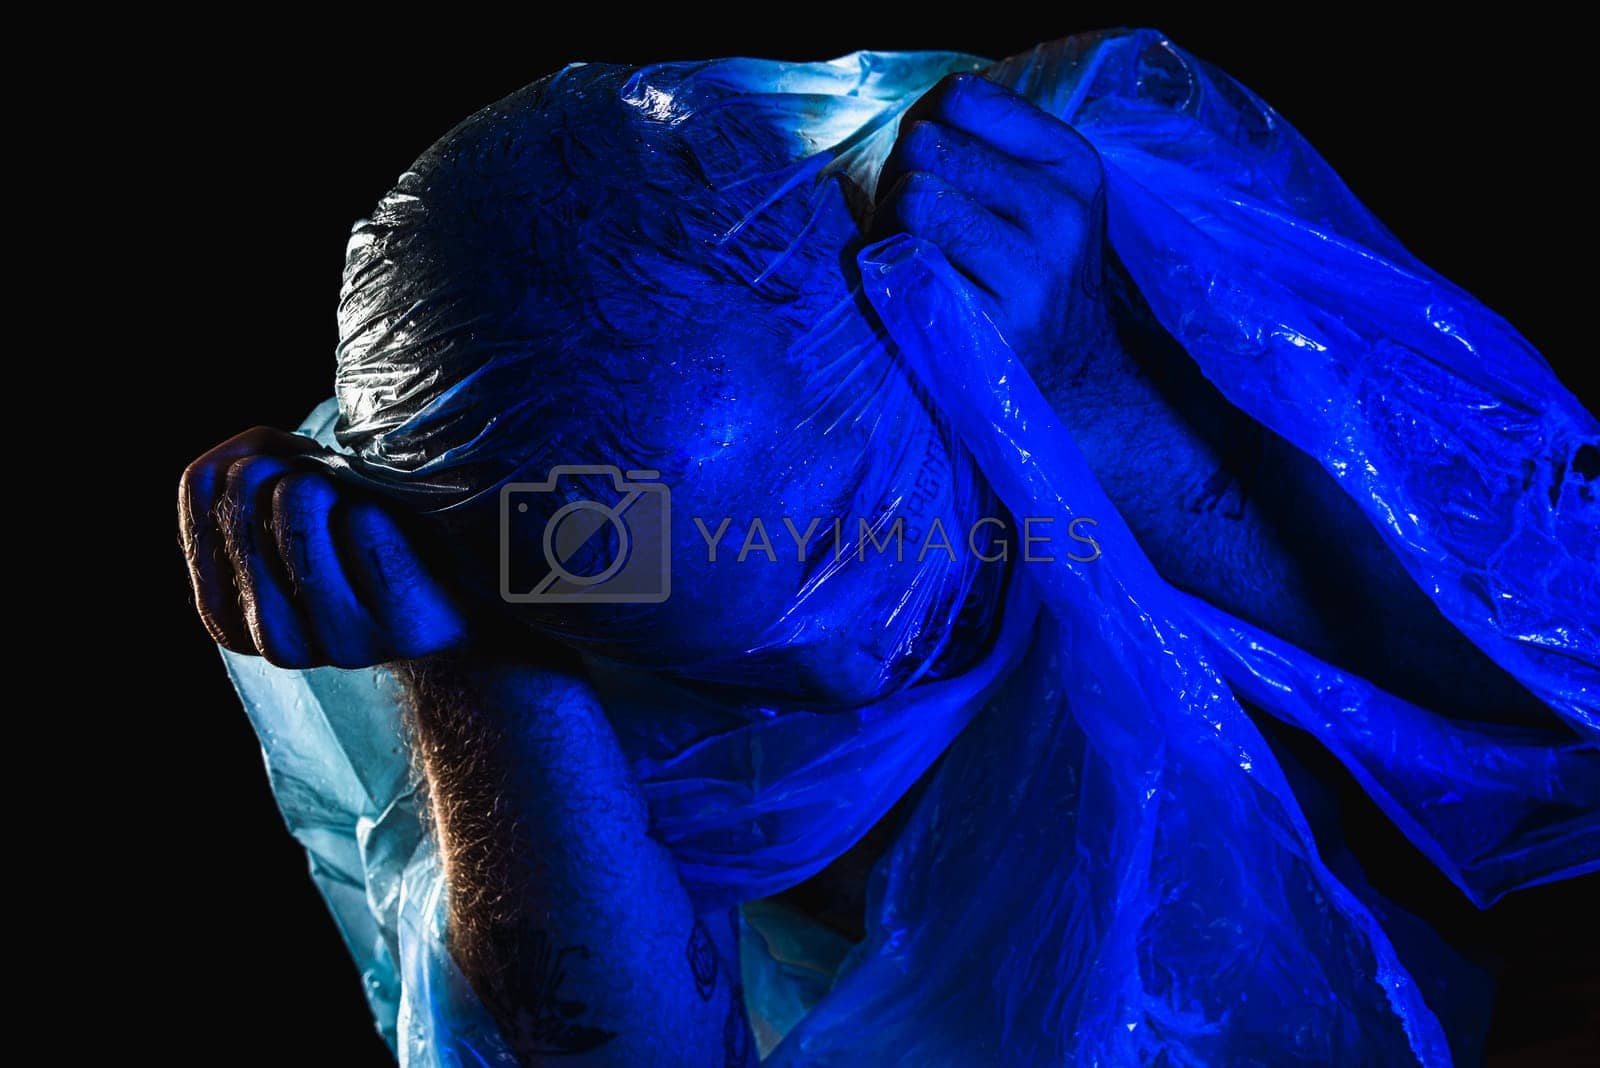 Royalty free image of Man with plastic bag over his head, suffocated. Studio shot with blue filter.  by ThalesAntonio